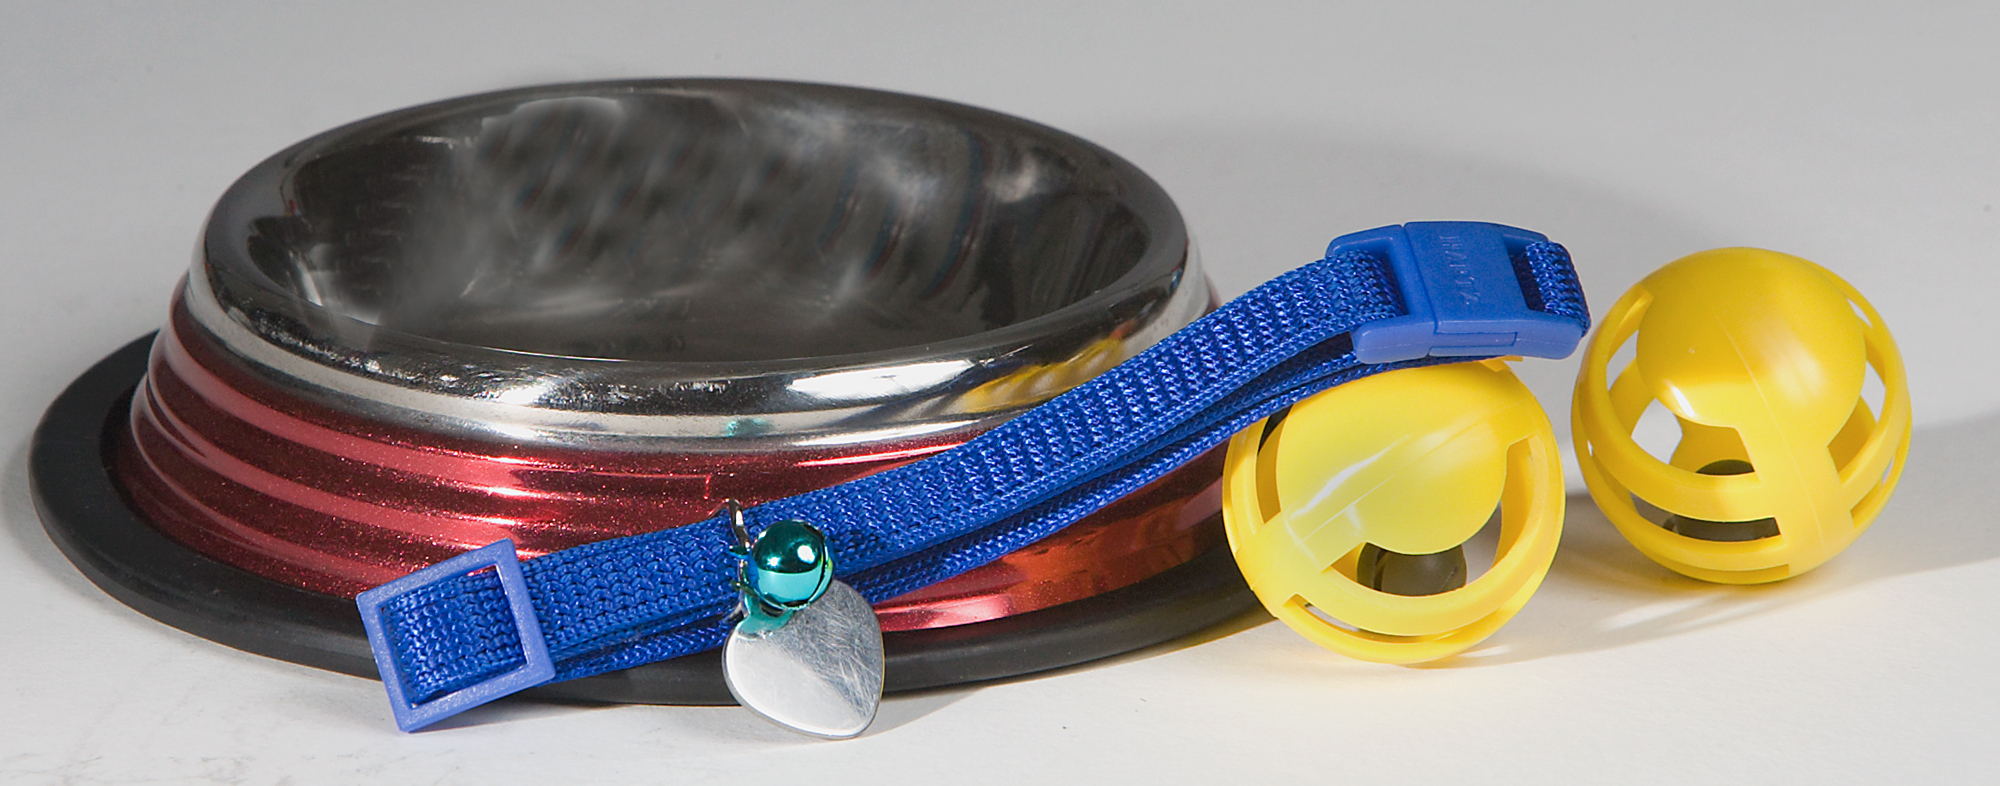 All the essential dog supplies, like a metal bowl, harness, and ball toys